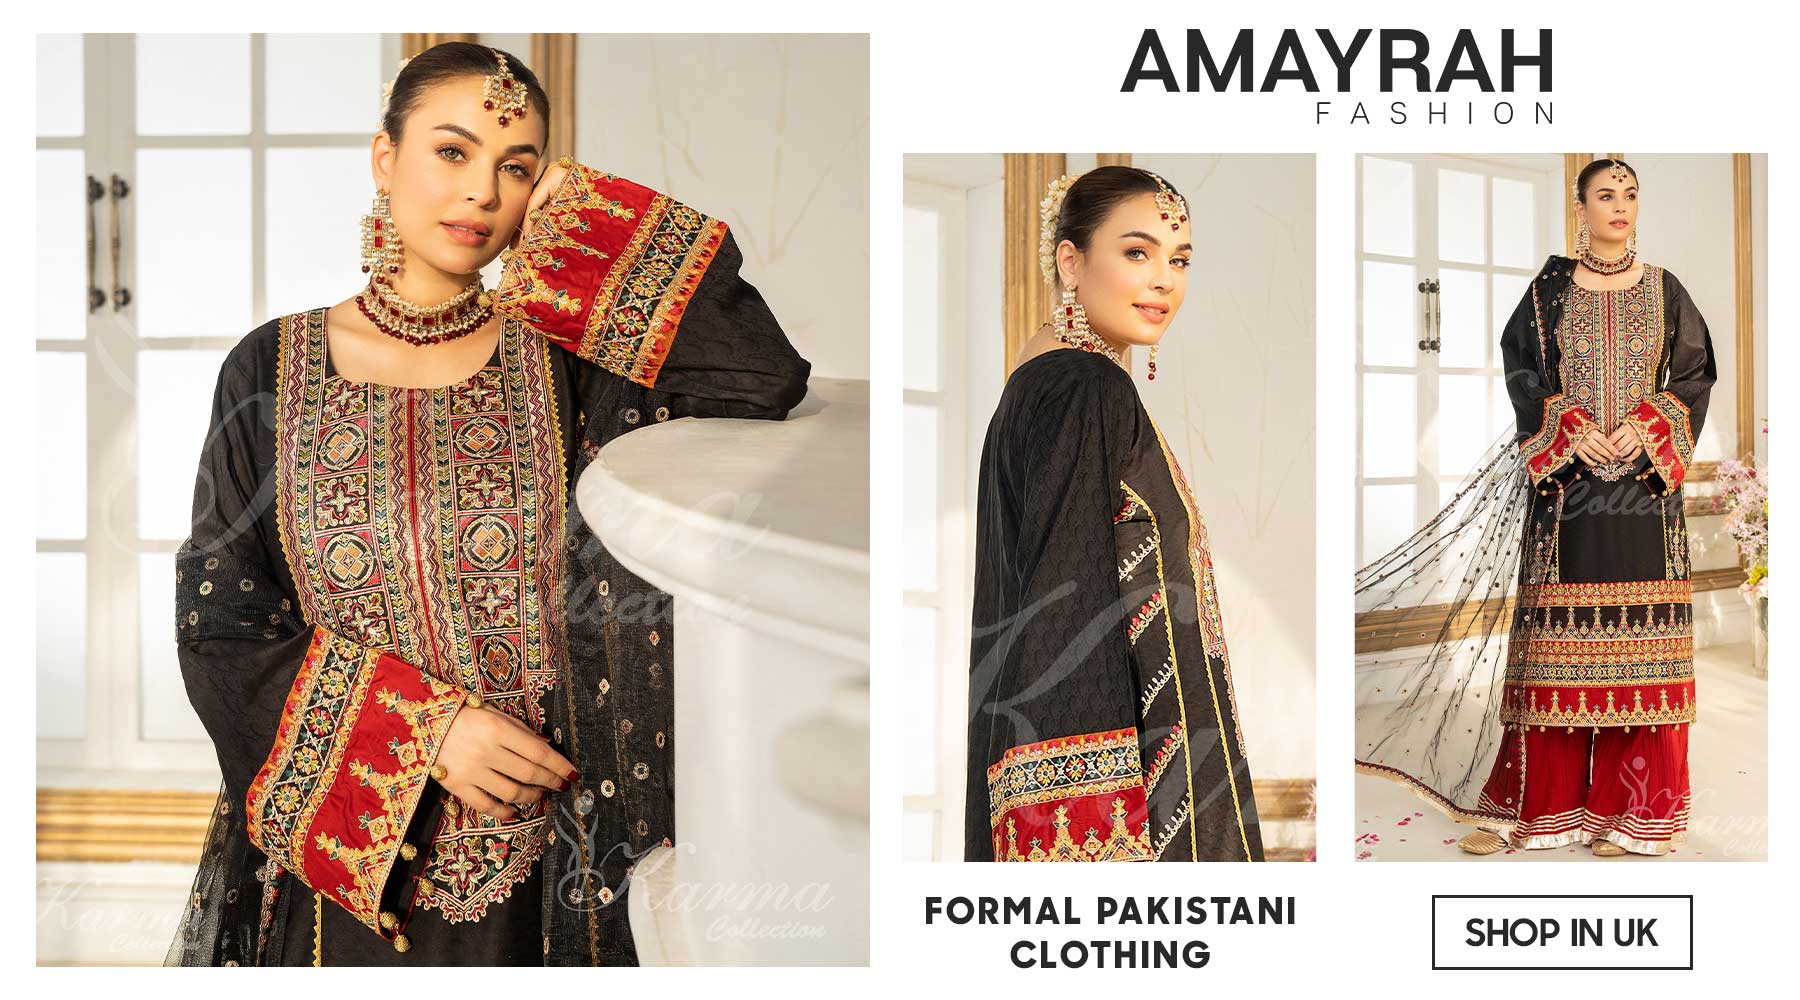 Discover the Finest Pakistani Formal Clothing at Amayrah Fashion